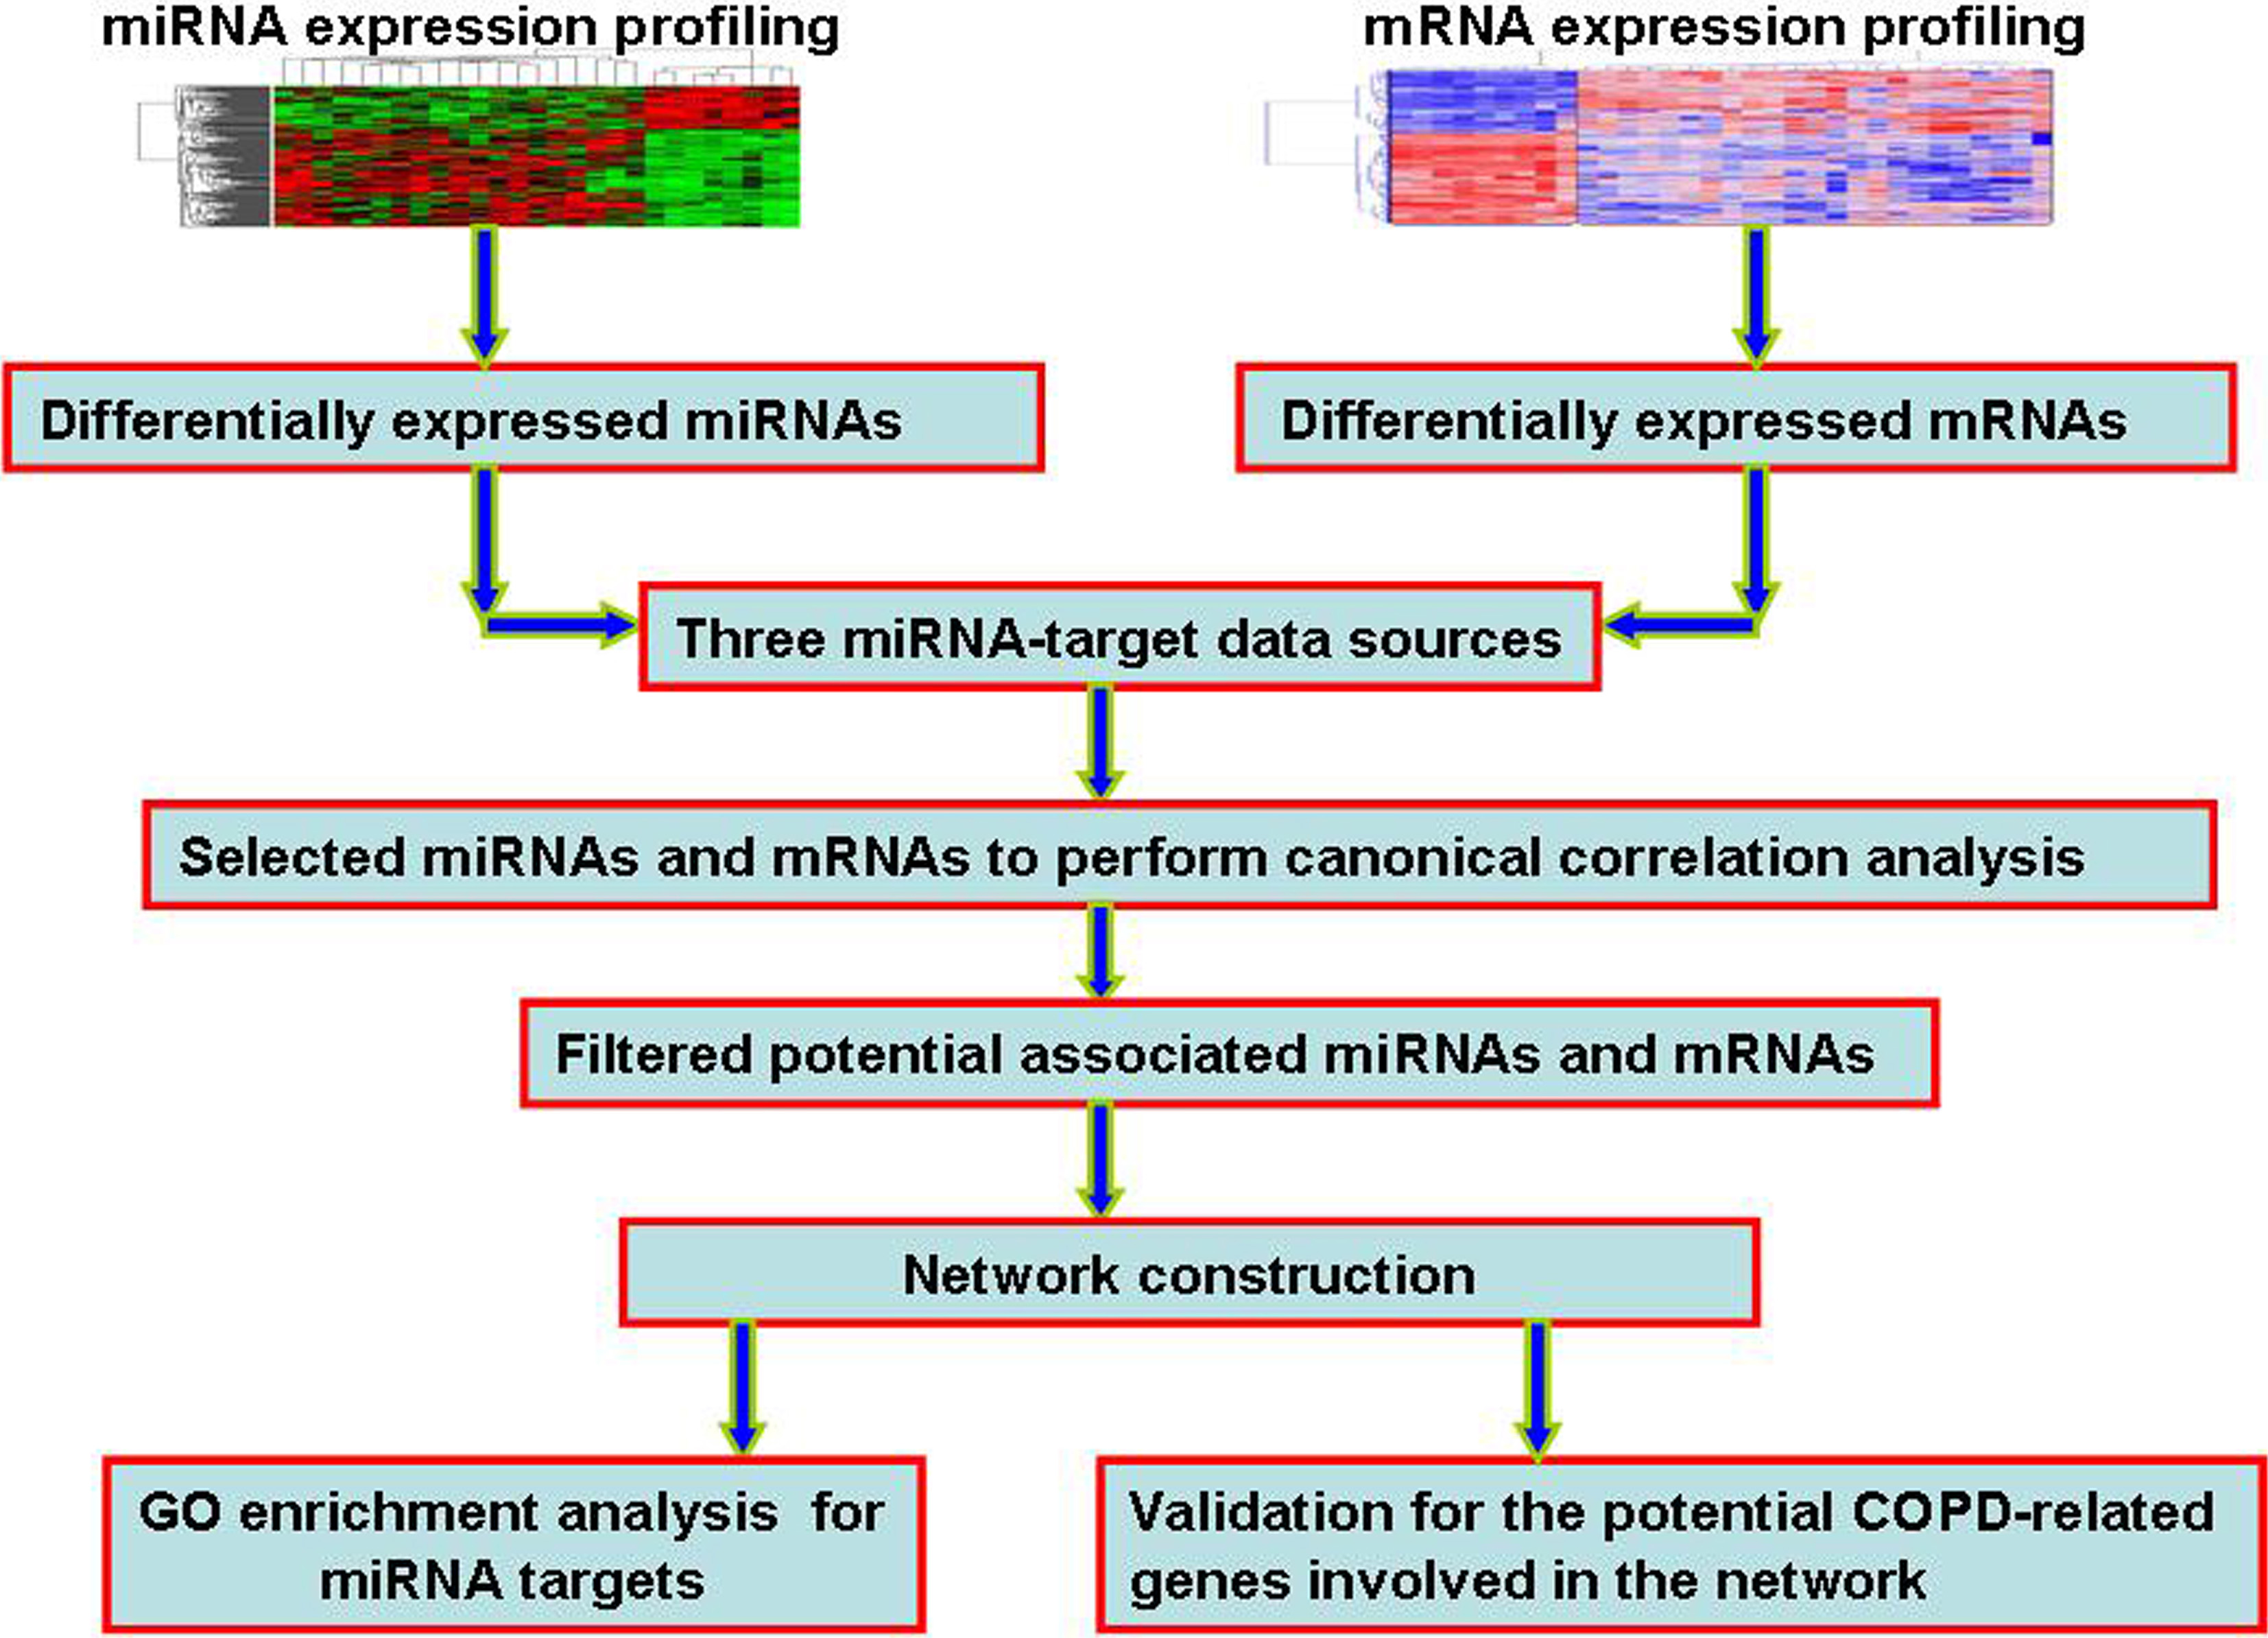 The flowchart of our work. Firstly, we identified the differentially expressed miRNAs and mRNAs. Secondly, by integrating three miRNA-target sources, we performed canonical correlation analysis to identify potential COPD-related miRNAs and mRNAs. Thirdly, we constructed and expanded miRNA-mRNA network. Finally, for miRNAs involved in the network, we performed GO functional enrichment analysis of their targets. We also performed the validation of potential COPD-related genes involved in the consturction network, including ROC curve analysis, SVM classification, and cluster analysis.